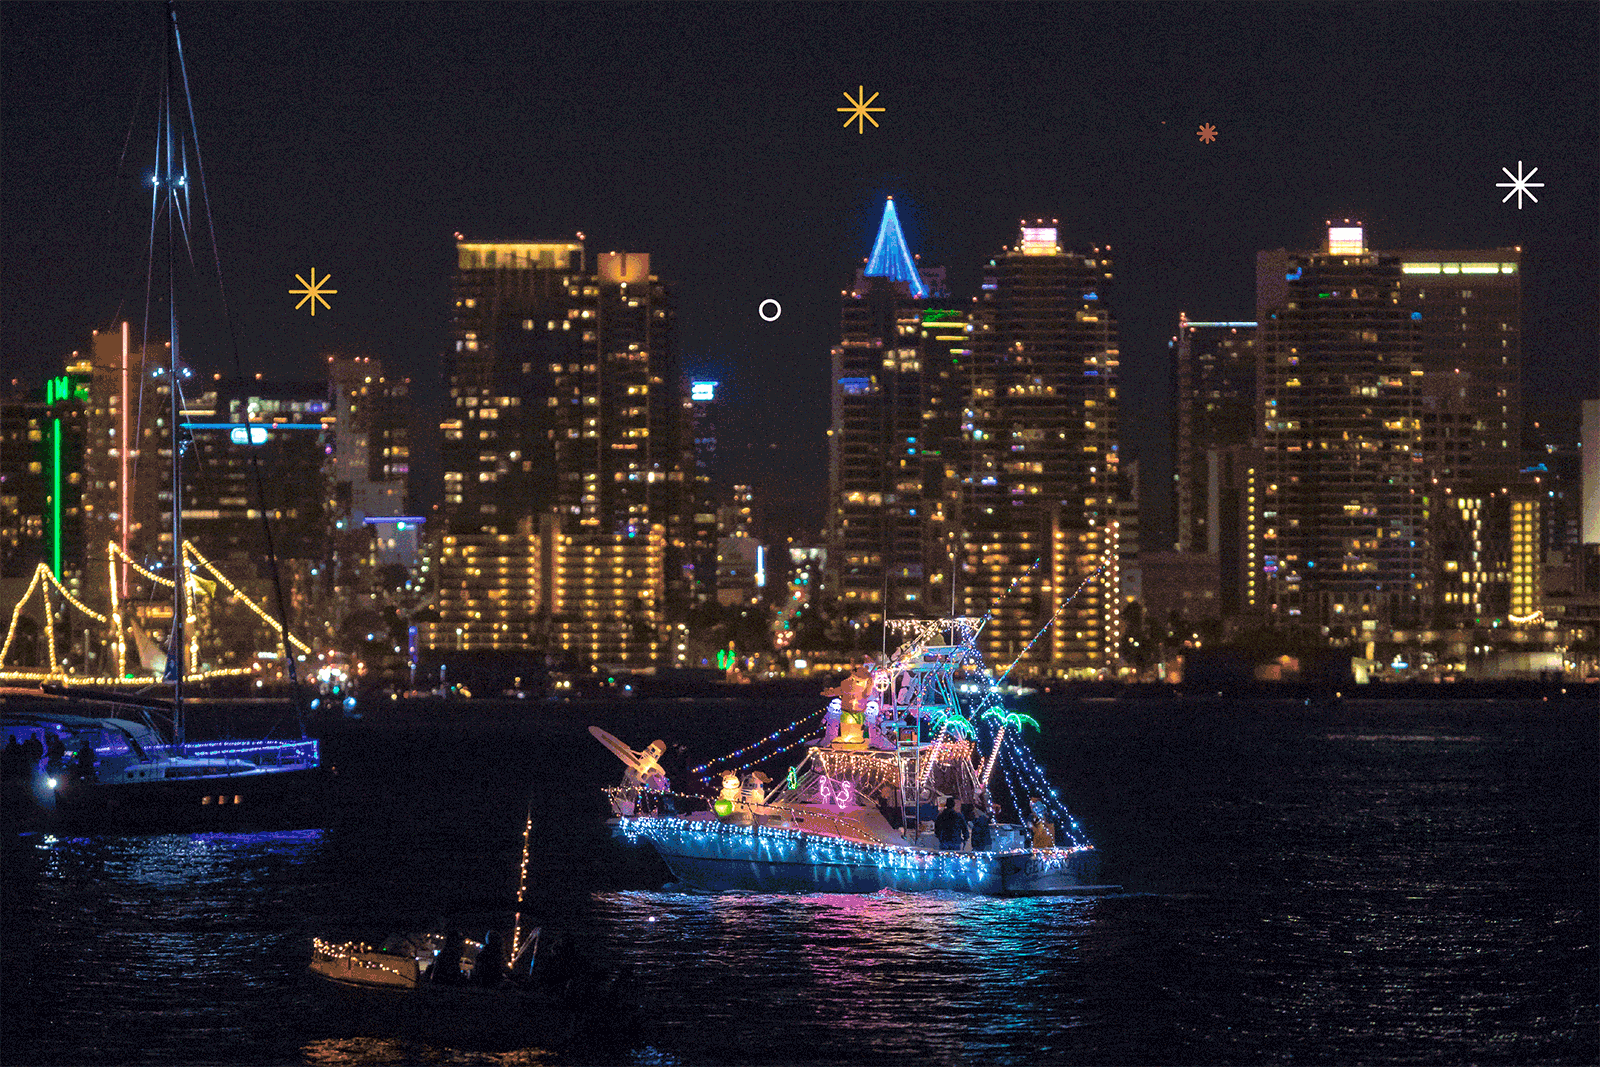 Sailboats, yachts and dinghies light up San Diego Bay during the 48th annual San Diego Bay Parade of Lights. Animated fireworks light up the sky.